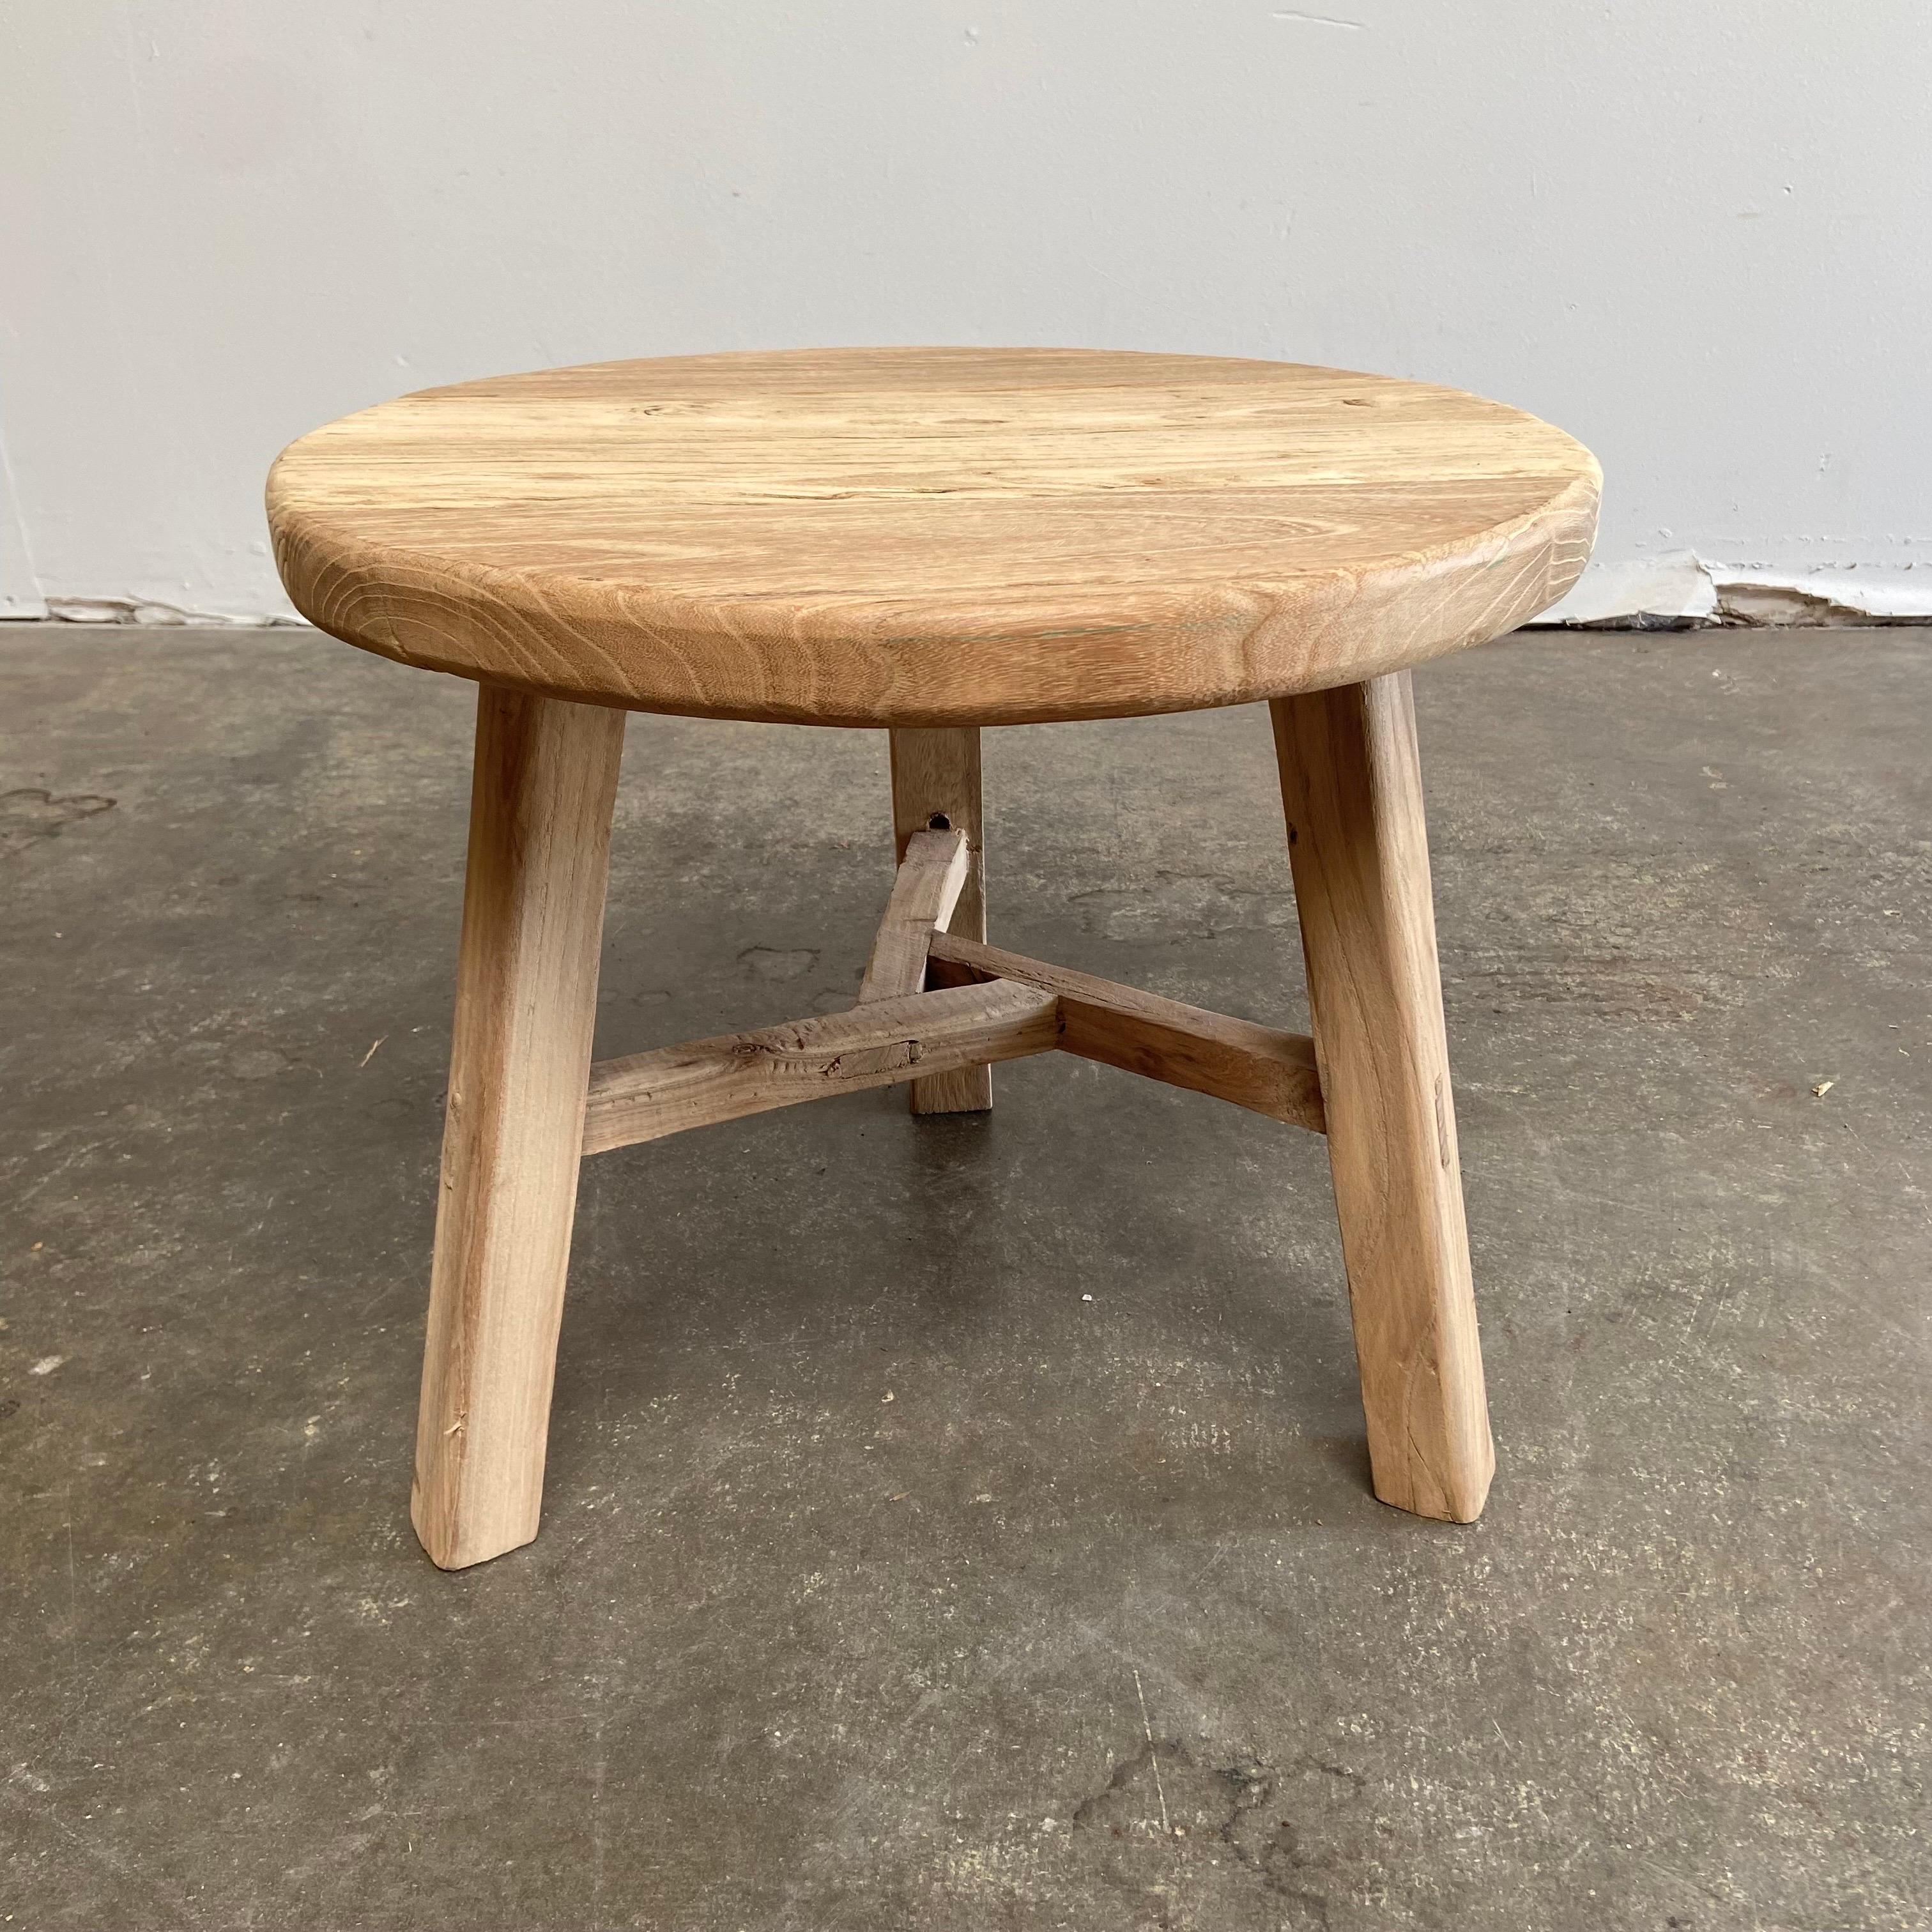 Round elm wood side table multiple quantities available. Natural unstained raw finish, solid elm wood, made by bloom home inc. Solid and sturdy, great for use next to a sofa, in between chairs, in a bath, or bedside.
Elm side table 20”RD. X 18”H